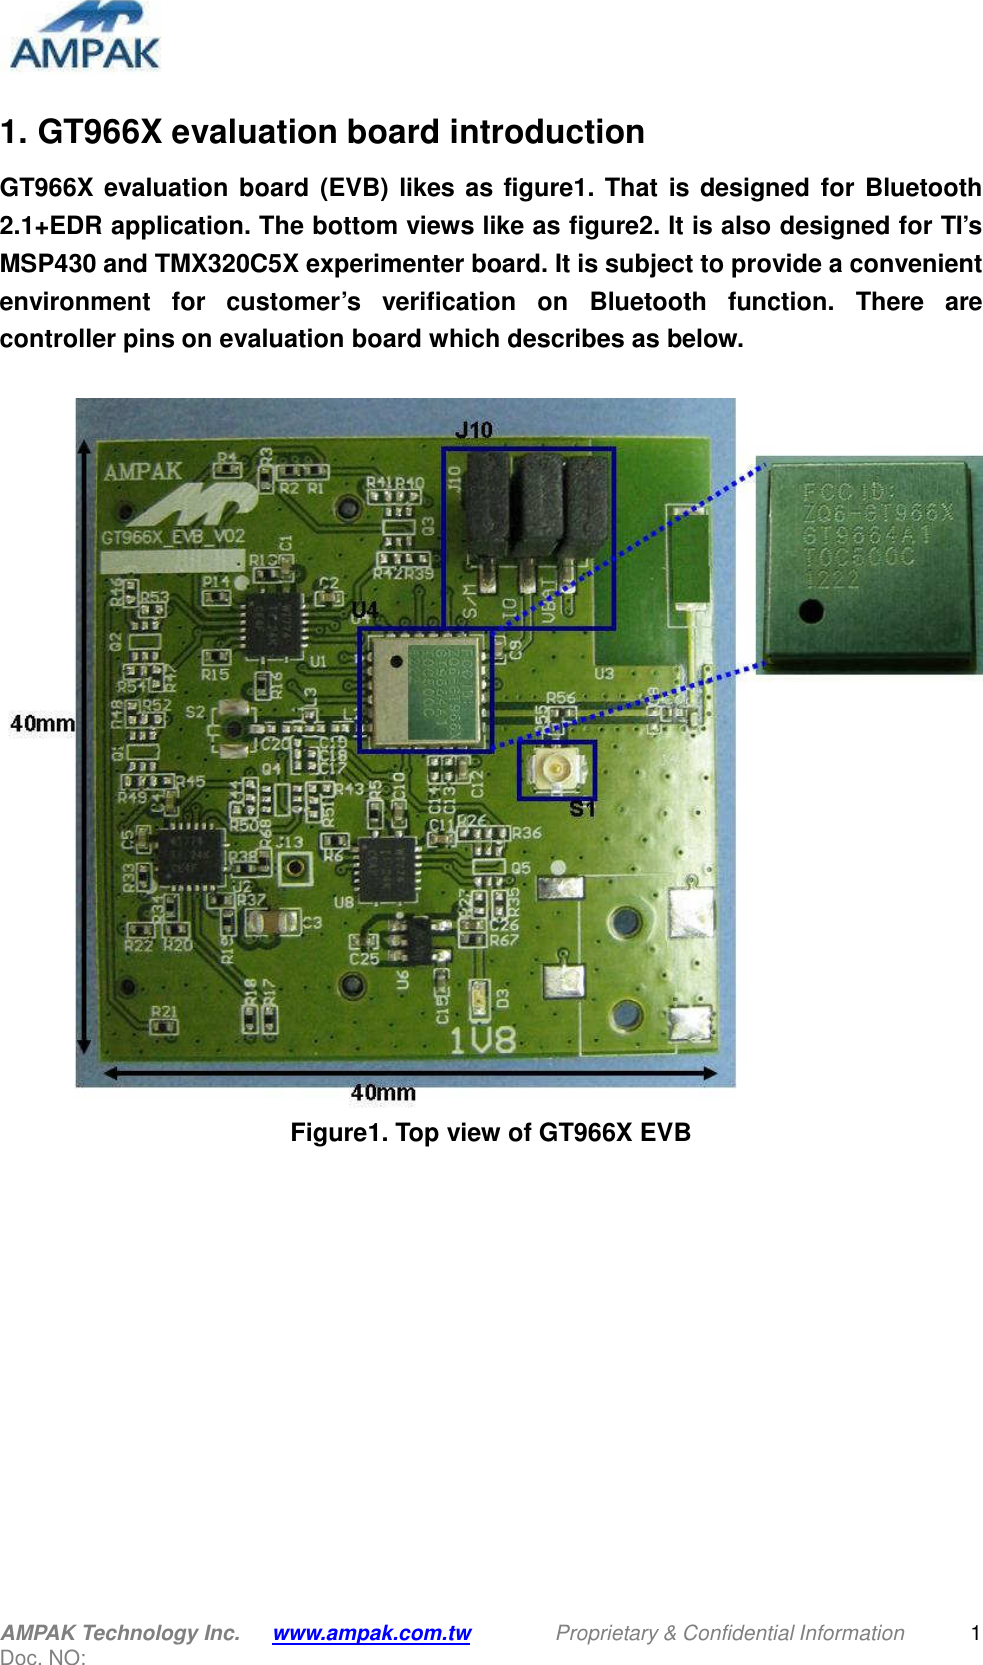  AMPAK Technology Inc.    www.ampak.com.tw    Proprietary &amp; Confidential Information   Doc. NO:  1 1. GT966X evaluation board introduction GT966X evaluation board (EVB) likes as figure1. That is designed for Bluetooth 2.1+EDR application. The bottom views like as figure2. It is also designed for TI’s MSP430 and TMX320C5X experimenter board. It is subject to provide a convenient environment  for  customer’s  verification  on  Bluetooth  function.  There  are controller pins on evaluation board which describes as below.   Figure1. Top view of GT966X EVB  